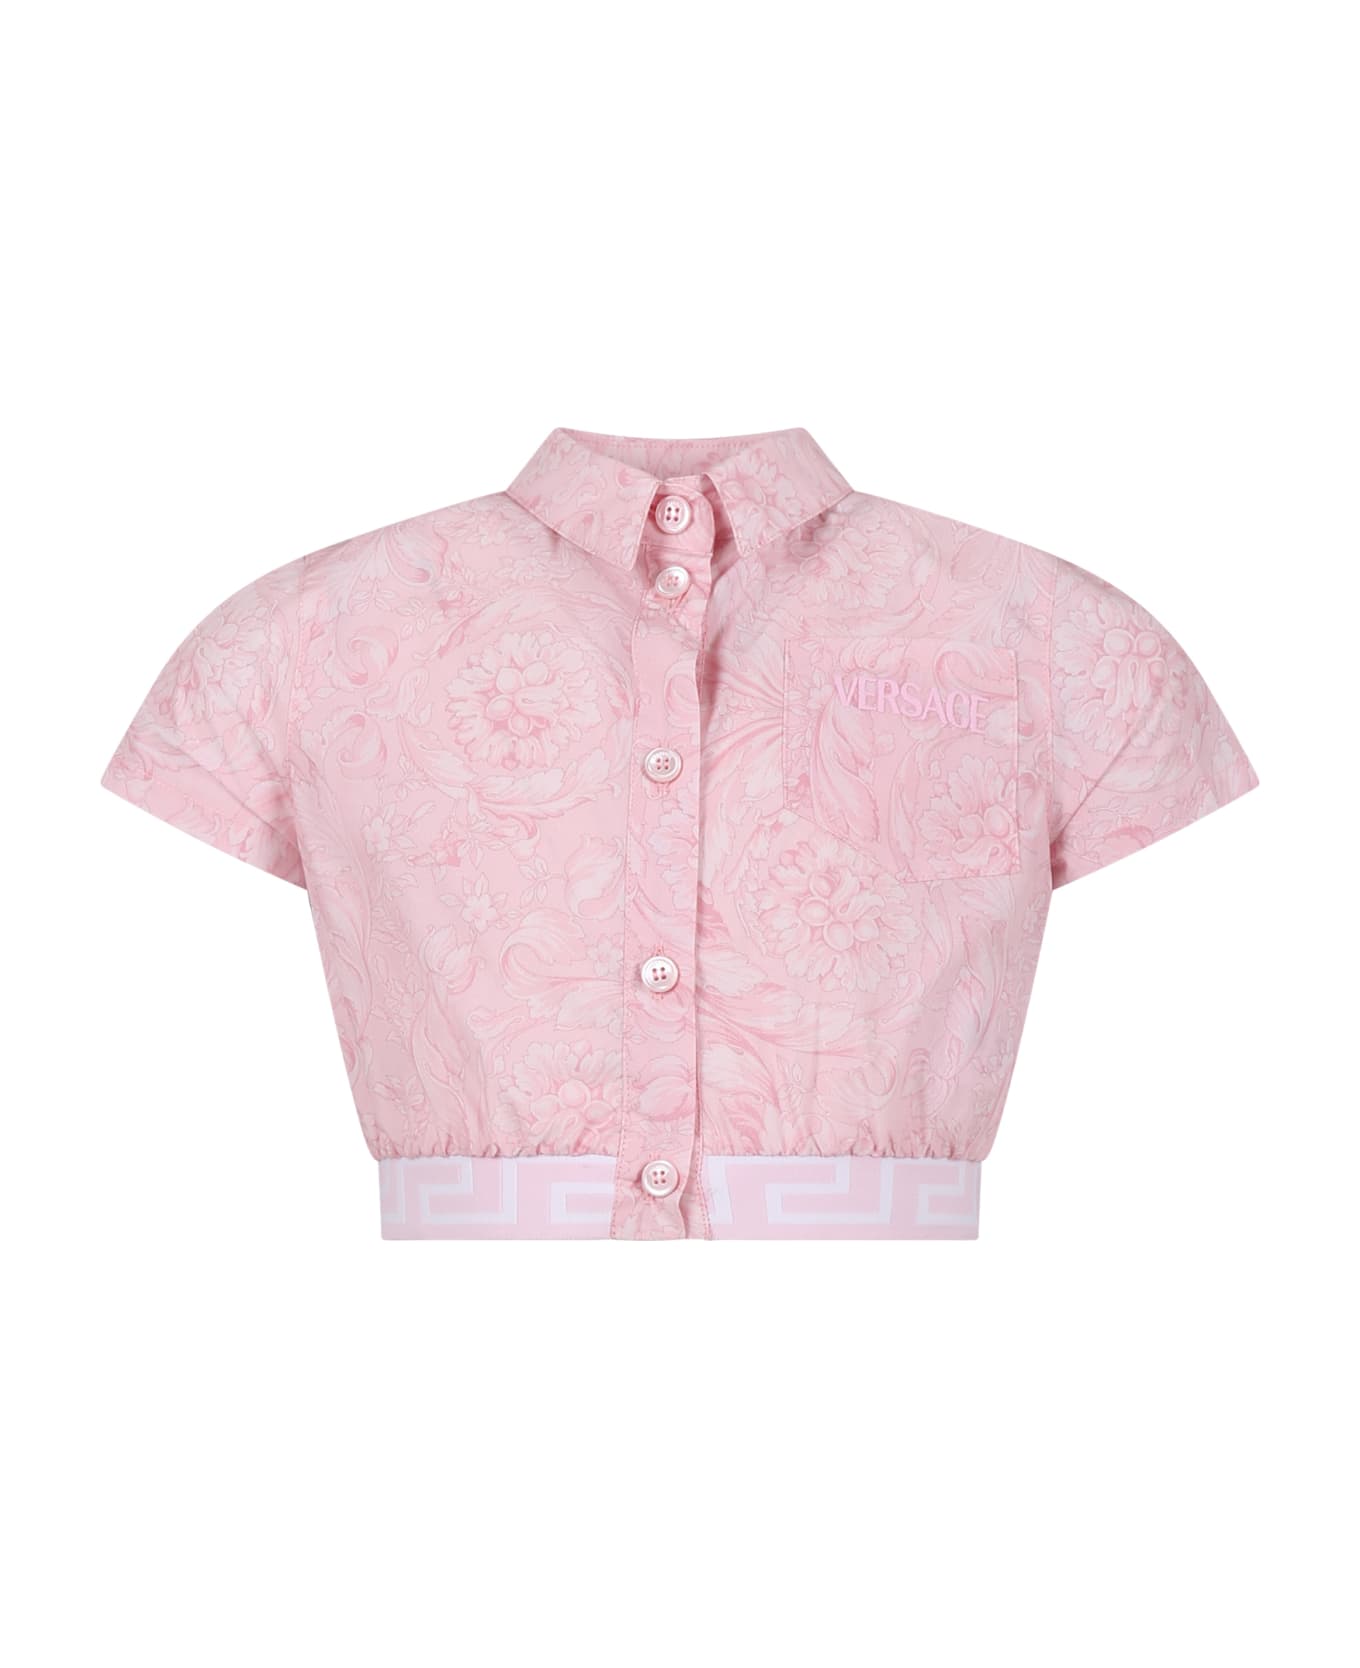 Versace Pink Shirt For Girl With Baroque Print - Pink